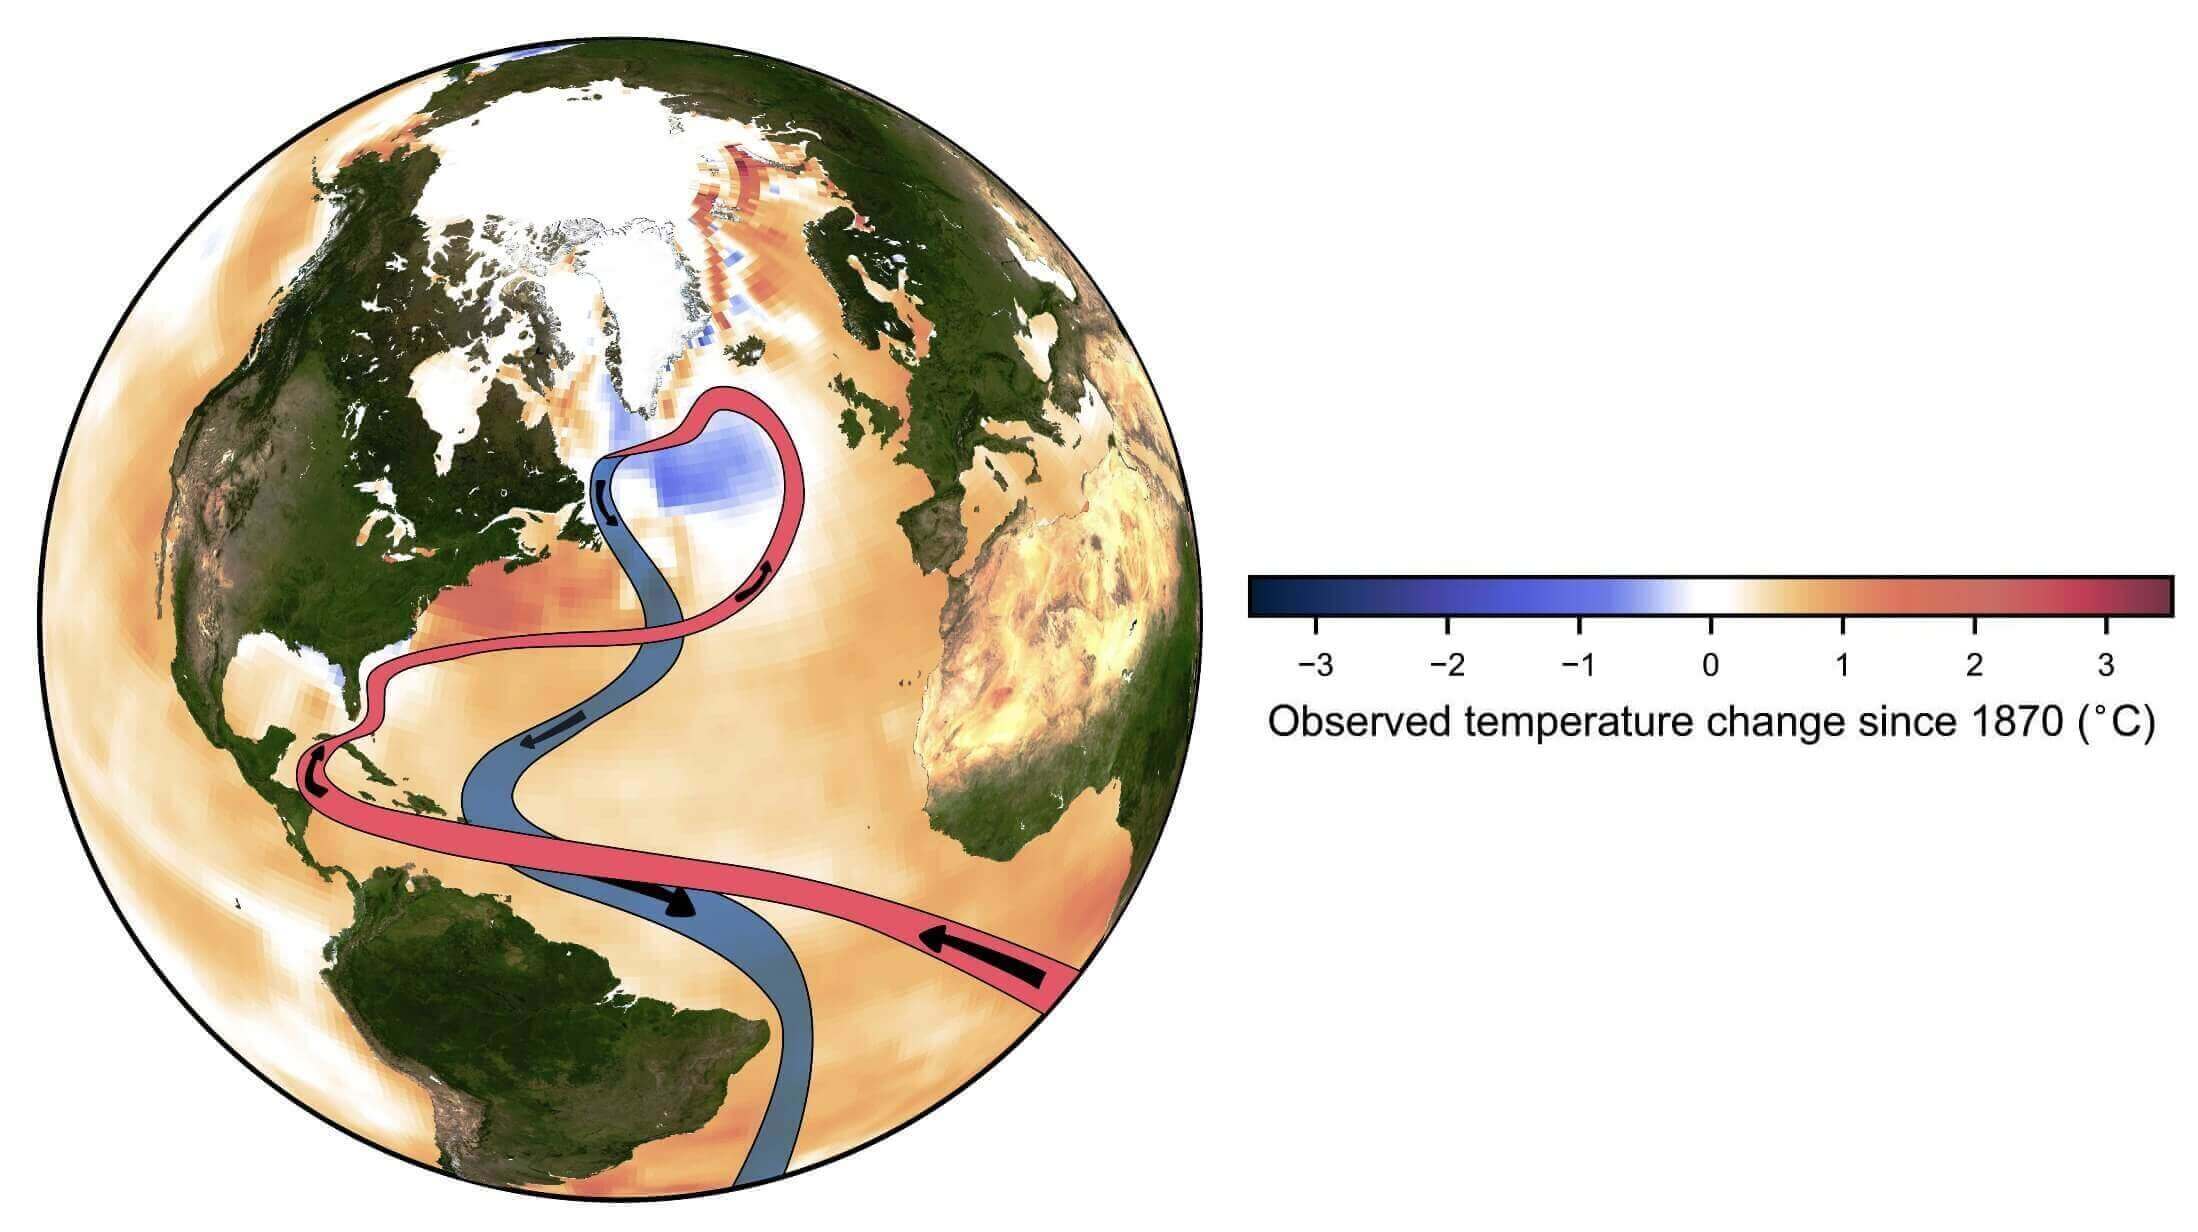 gulf-stream-anomaly-collapse-ocean-temperature-observation-noaa-long-term-united-states-coast-north-america-climate